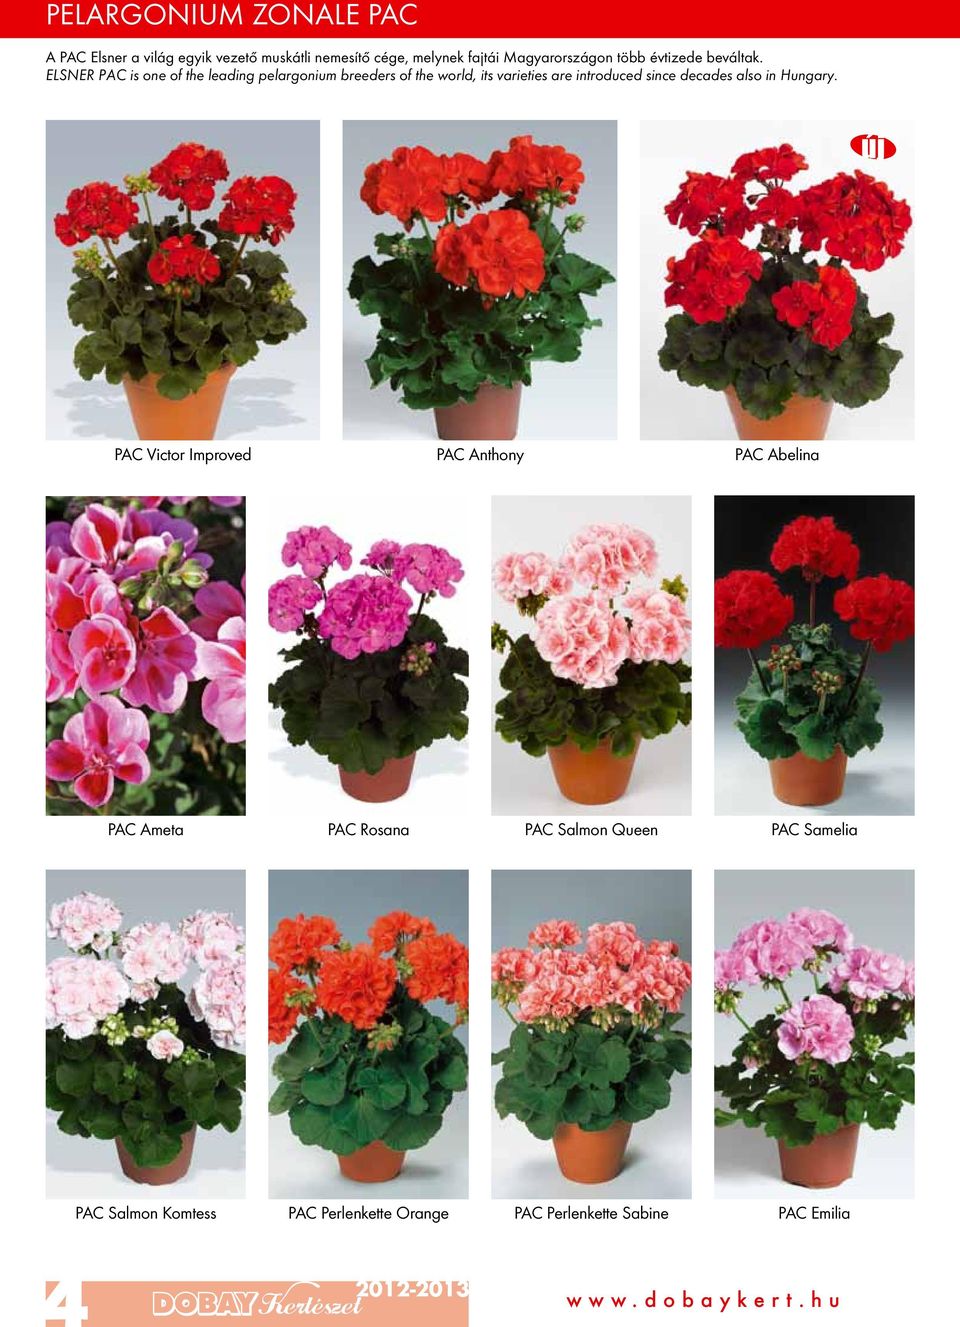 ELSNER PAC is one of the leading pelargonium breeders of the world, its varieties are introduced since